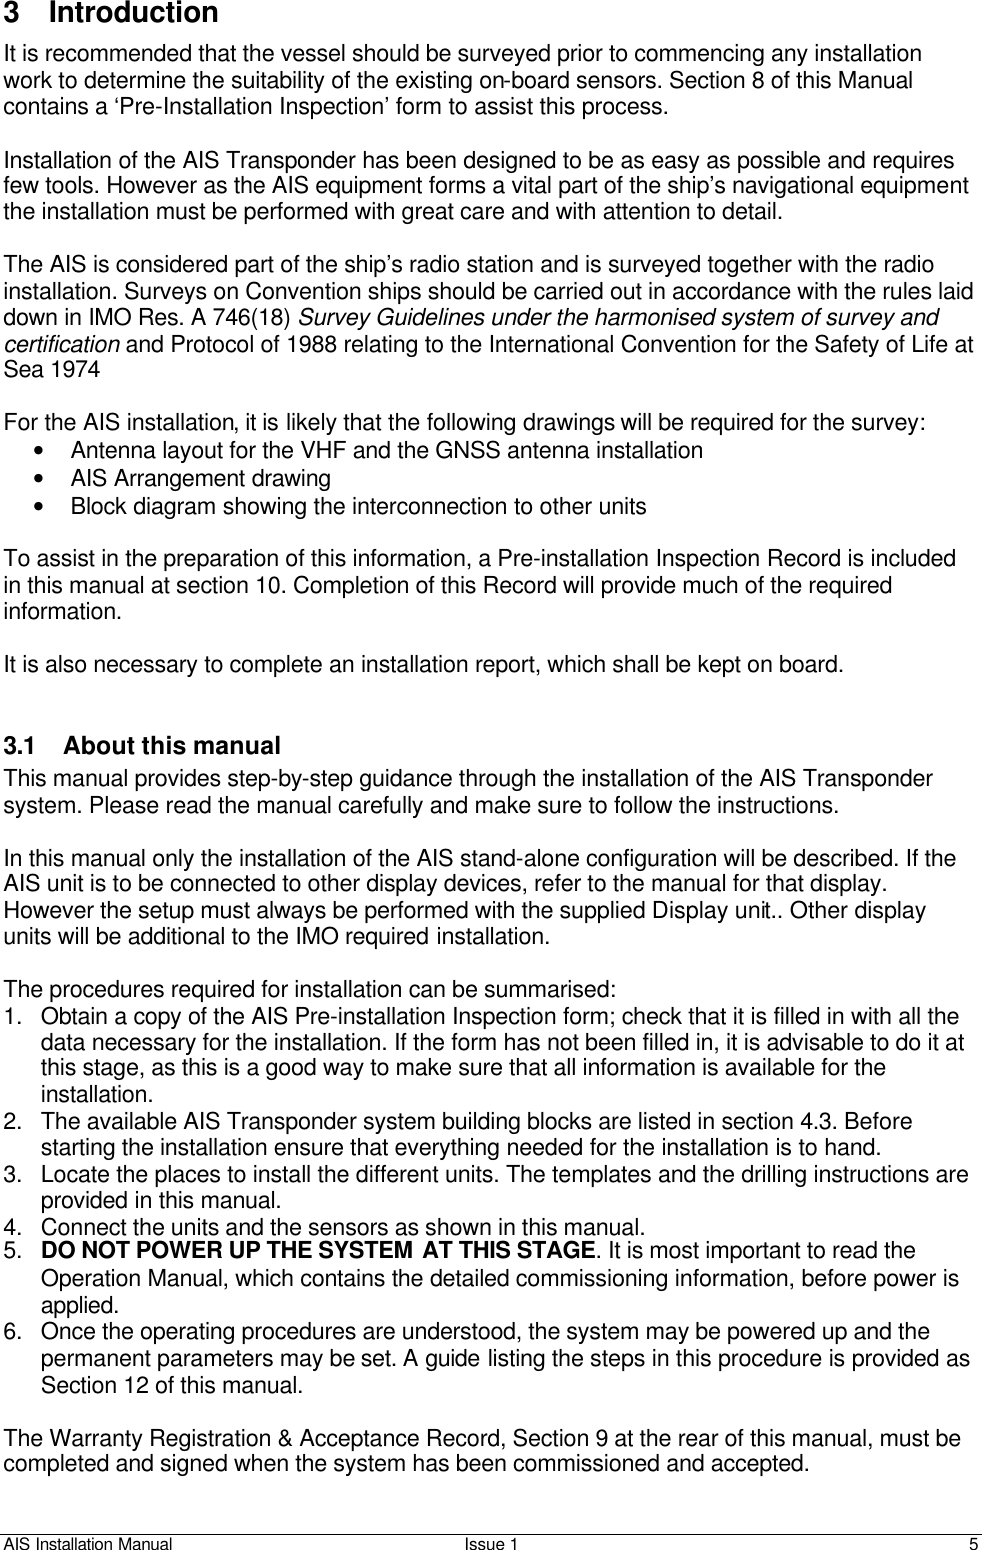 AIS Installation Manual Issue 1 5     3 Introduction It is recommended that the vessel should be surveyed prior to commencing any installation work to determine the suitability of the existing on-board sensors. Section 8 of this Manual contains a ‘Pre-Installation Inspection’ form to assist this process.  Installation of the AIS Transponder has been designed to be as easy as possible and requires few tools. However as the AIS equipment forms a vital part of the ship’s navigational equipment the installation must be performed with great care and with attention to detail.  The AIS is considered part of the ship’s radio station and is surveyed together with the radio installation. Surveys on Convention ships should be carried out in accordance with the rules laid down in IMO Res. A 746(18) Survey Guidelines under the harmonised system of survey and certification and Protocol of 1988 relating to the International Convention for the Safety of Life at Sea 1974  For the AIS installation, it is likely that the following drawings will be required for the survey: • Antenna layout for the VHF and the GNSS antenna installation  • AIS Arrangement drawing  • Block diagram showing the interconnection to other units   To assist in the preparation of this information, a Pre-installation Inspection Record is included in this manual at section 10. Completion of this Record will provide much of the required information.   It is also necessary to complete an installation report, which shall be kept on board.   3.1 About this manual This manual provides step-by-step guidance through the installation of the AIS Transponder system. Please read the manual carefully and make sure to follow the instructions.   In this manual only the installation of the AIS stand-alone configuration will be described. If the AIS unit is to be connected to other display devices, refer to the manual for that display. However the setup must always be performed with the supplied Display unit.. Other display units will be additional to the IMO required installation.  The procedures required for installation can be summarised: 1. Obtain a copy of the AIS Pre-installation Inspection form; check that it is filled in with all the data necessary for the installation. If the form has not been filled in, it is advisable to do it at this stage, as this is a good way to make sure that all information is available for the installation.  2. The available AIS Transponder system building blocks are listed in section 4.3. Before starting the installation ensure that everything needed for the installation is to hand. 3. Locate the places to install the different units. The templates and the drilling instructions are provided in this manual. 4. Connect the units and the sensors as shown in this manual. 5. DO NOT POWER UP THE SYSTEM AT THIS STAGE. It is most important to read the Operation Manual, which contains the detailed commissioning information, before power is applied. 6. Once the operating procedures are understood, the system may be powered up and the permanent parameters may be set. A guide listing the steps in this procedure is provided as Section 12 of this manual.   The Warranty Registration &amp; Acceptance Record, Section 9 at the rear of this manual, must be completed and signed when the system has been commissioned and accepted.    